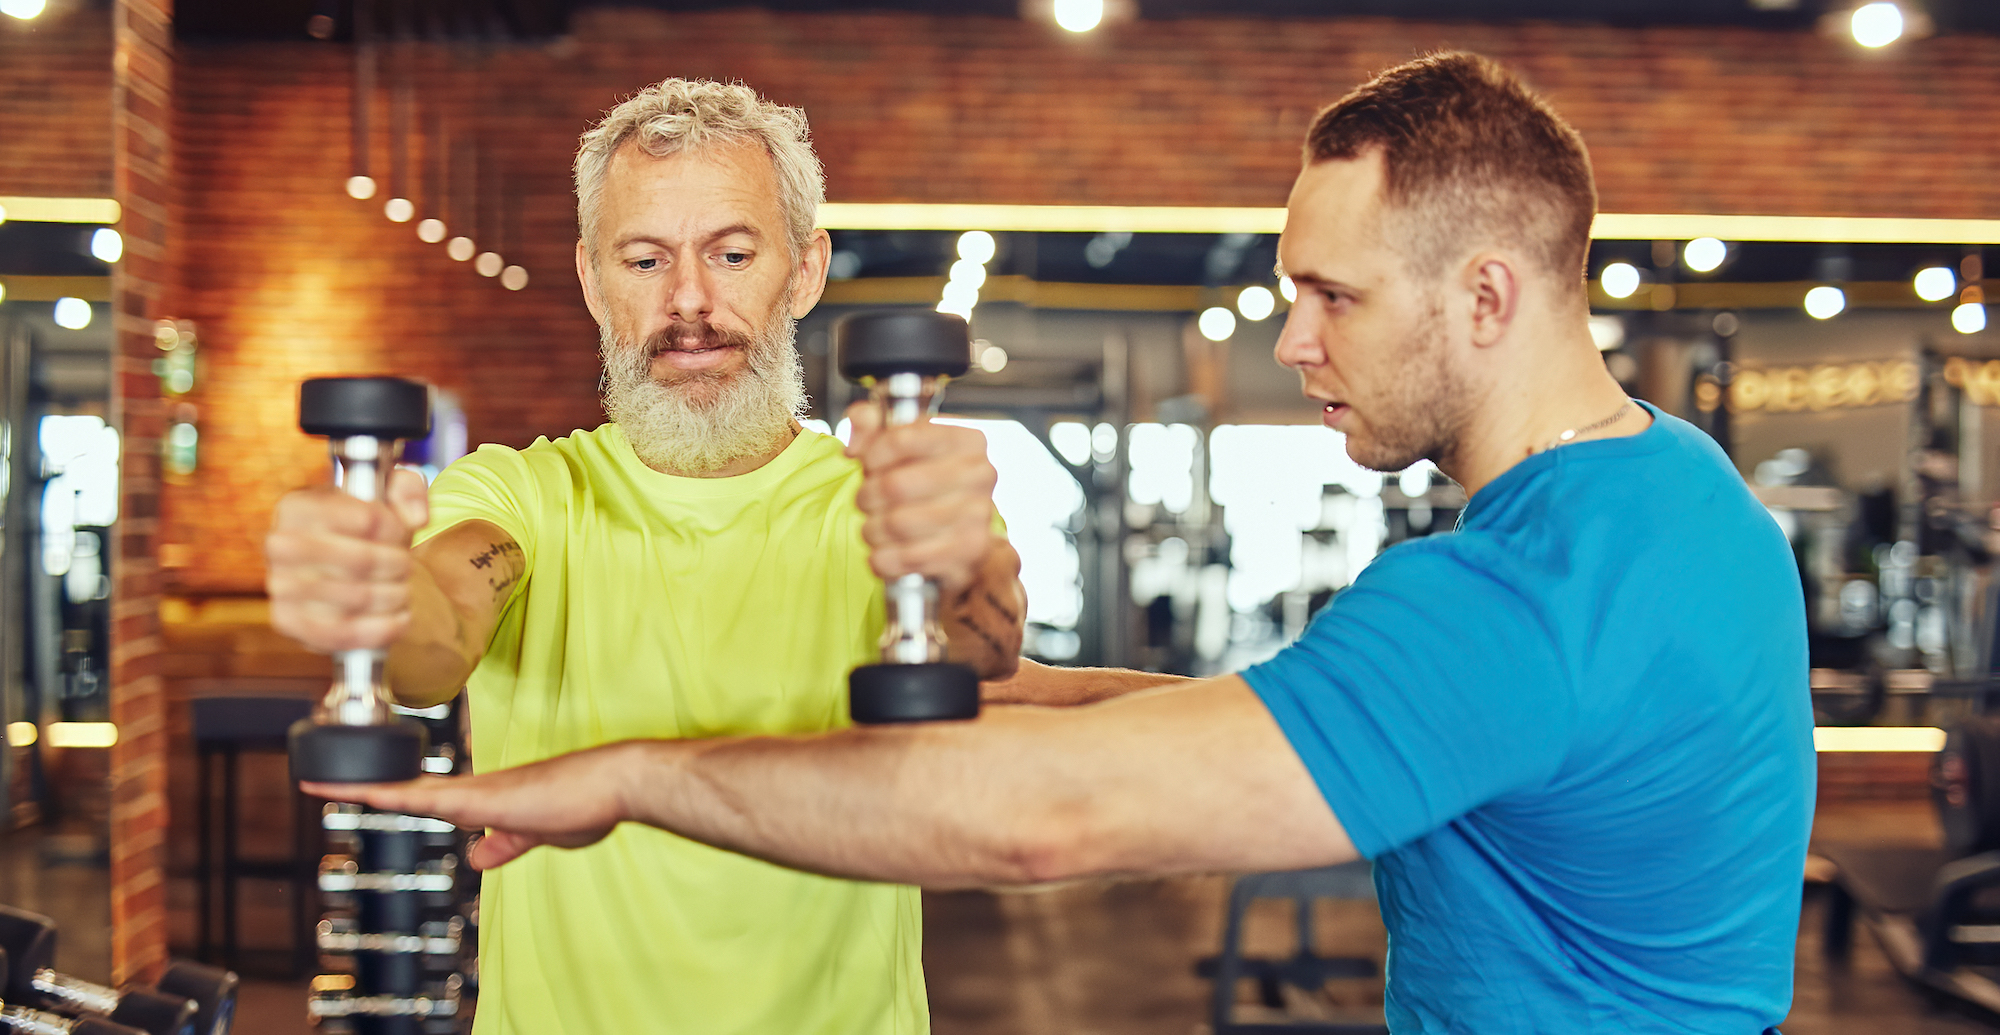 personal trainer in gym is assisting his client with a dumbbell lateral rais